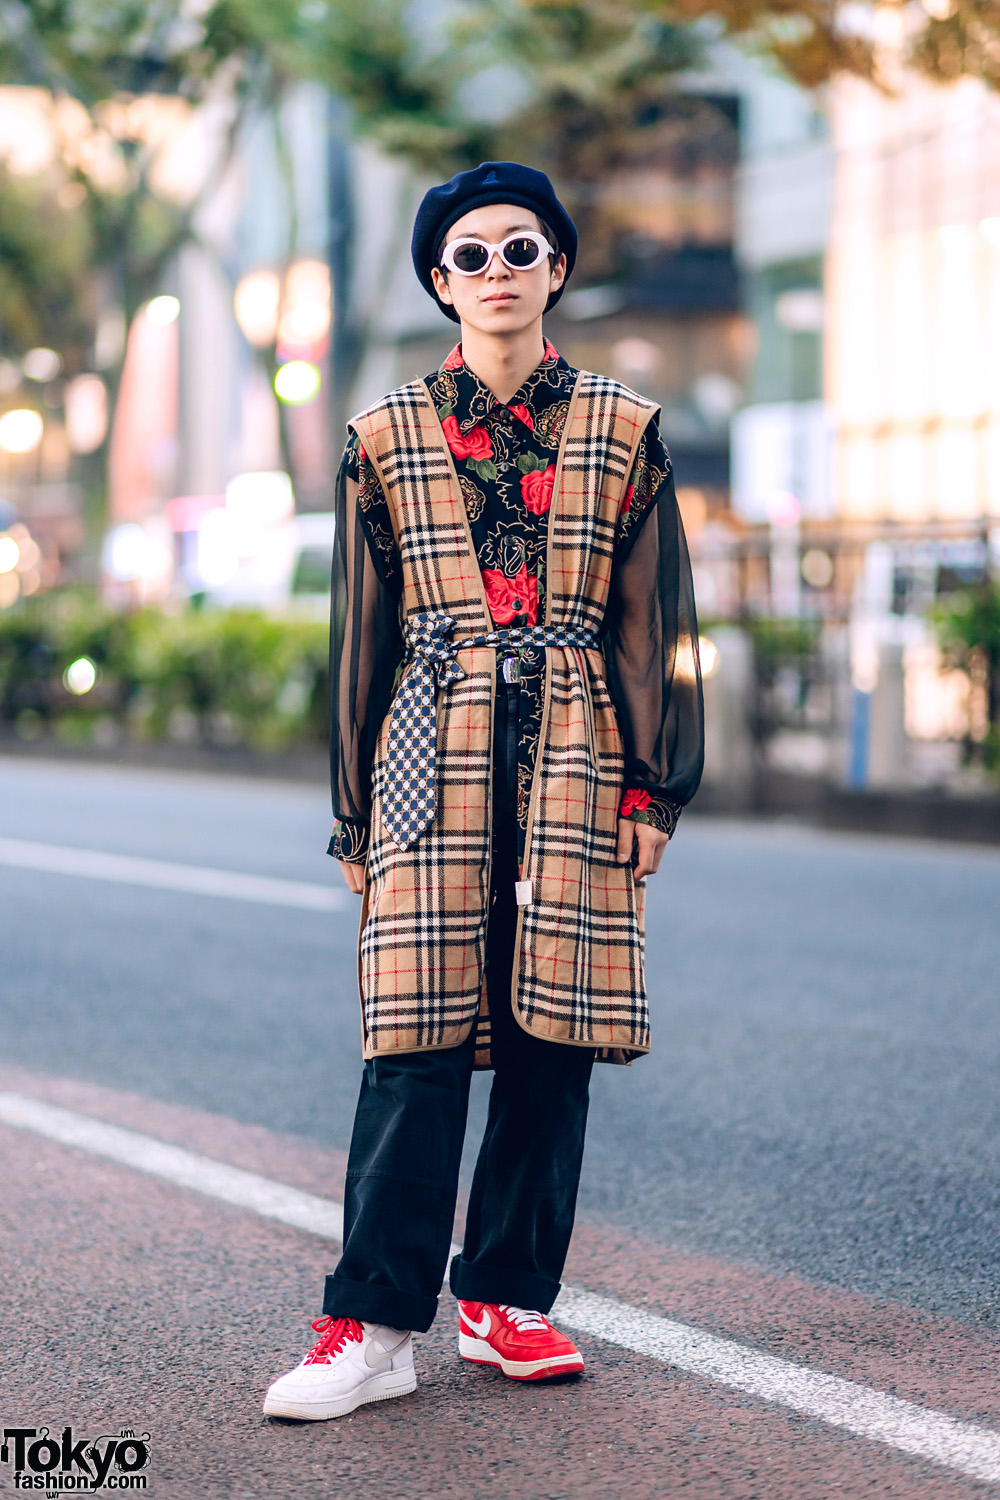 Mixed Prints Street Style in Harajuku w/ Burberry Coat Liner, Floral Shirt, Hugo Boss, Kangol & Nike Mismatched Sneakers